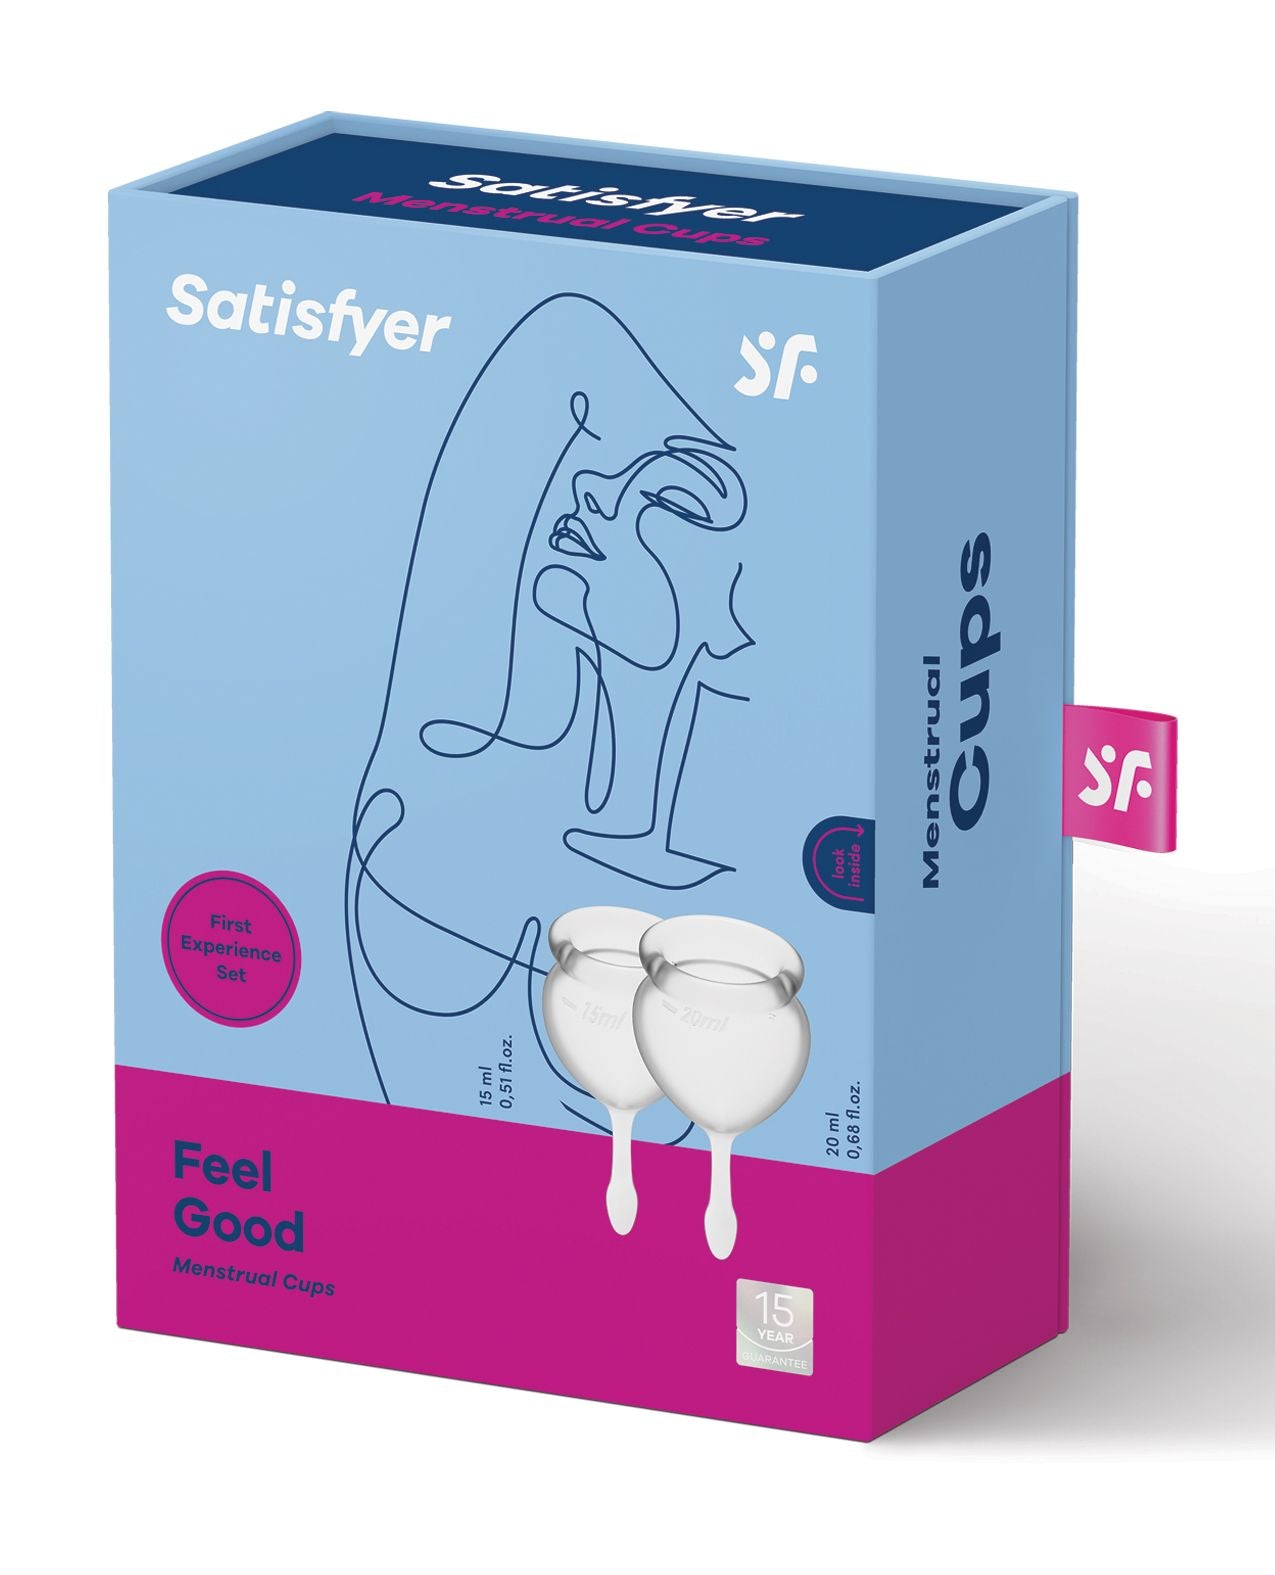 Satisfyer Feel Good Mensural Cup in its box (clear).